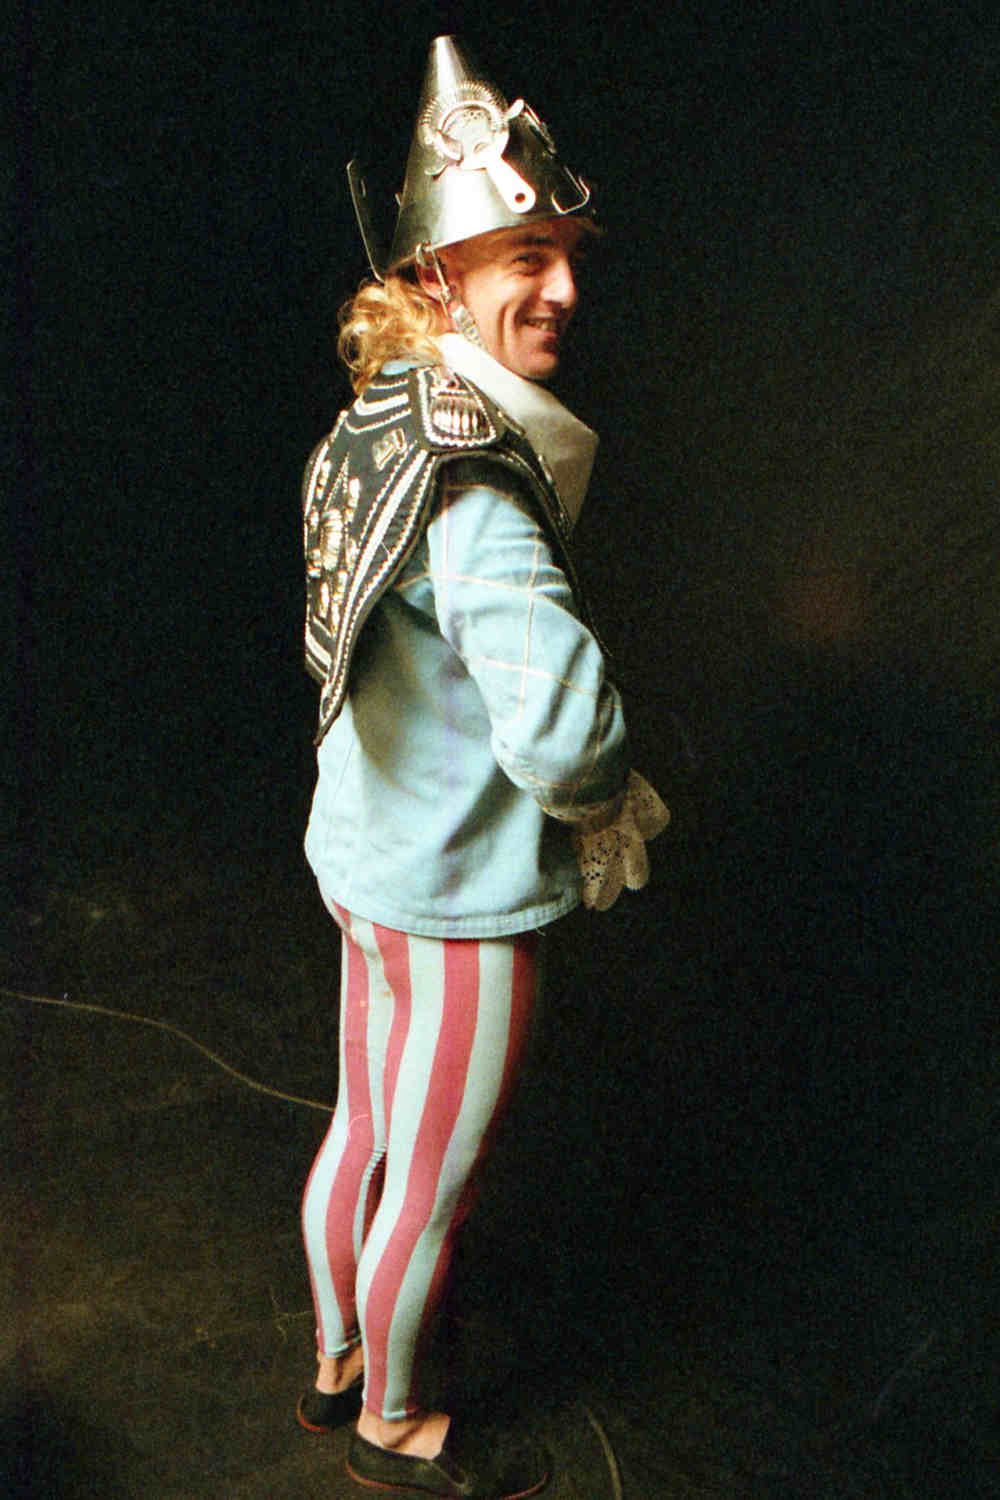 Handspan Theatre Guts costumed actor wearing blue and silver jacket, striped blue and purple tights and silver colander helmet